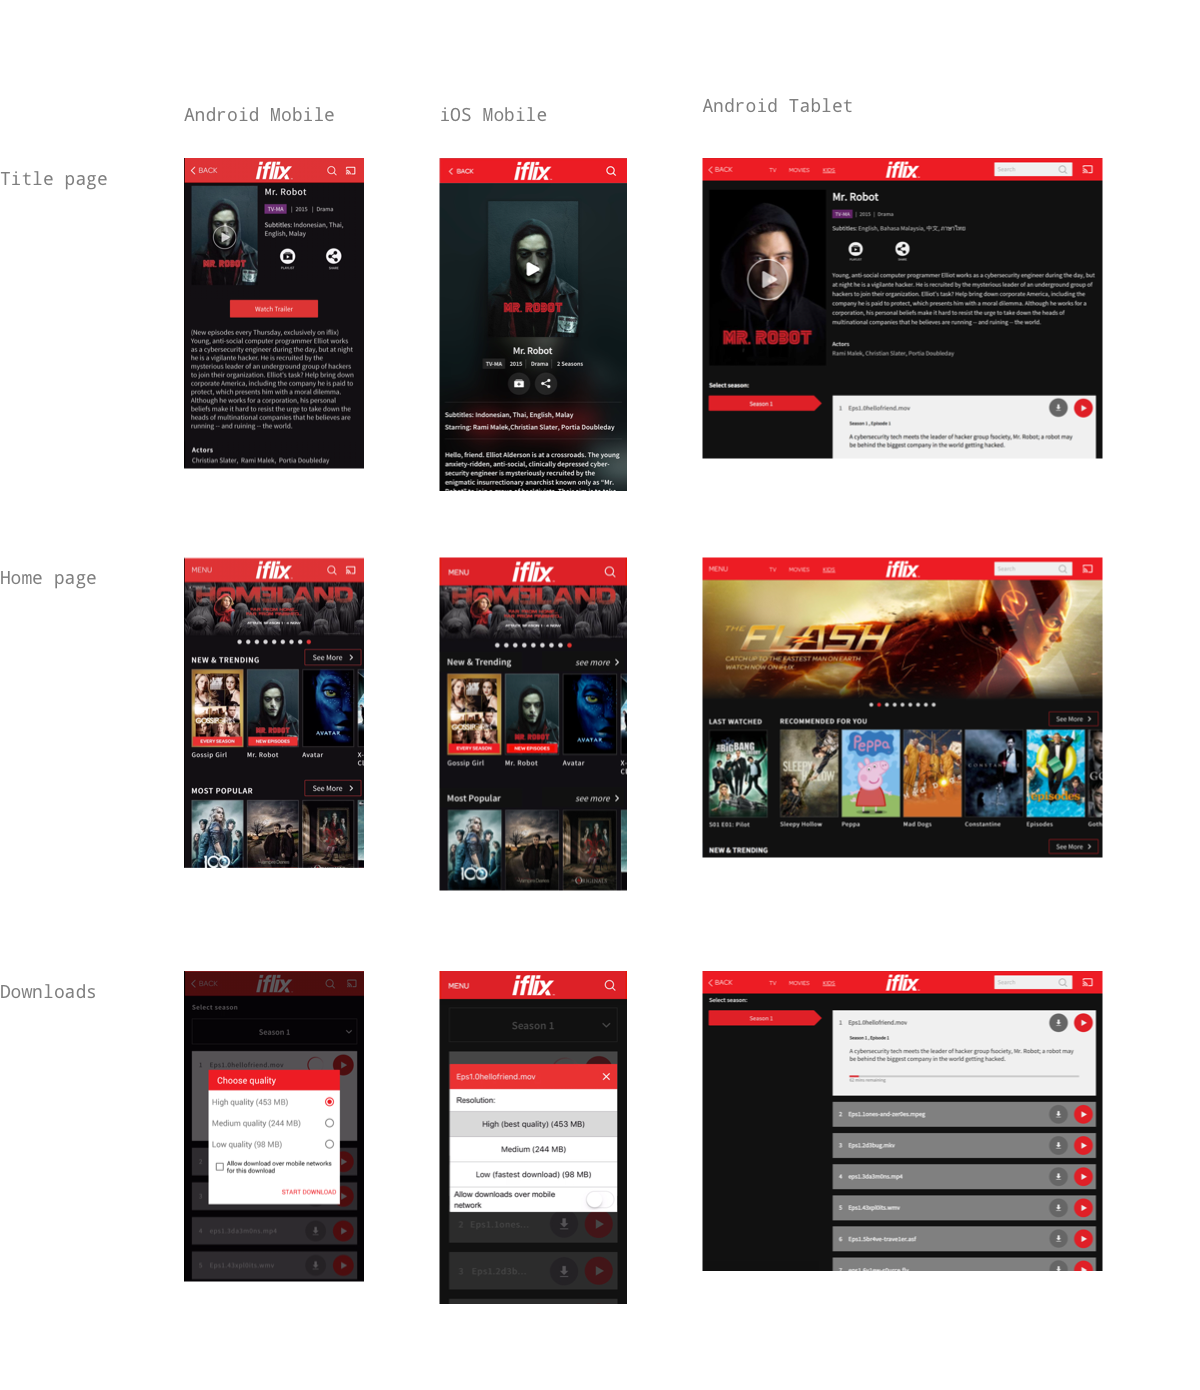 Screenshots of iflix's Android mobile, iOS mobile, and Android tablet apps, showing the home, title, and downloads screens.